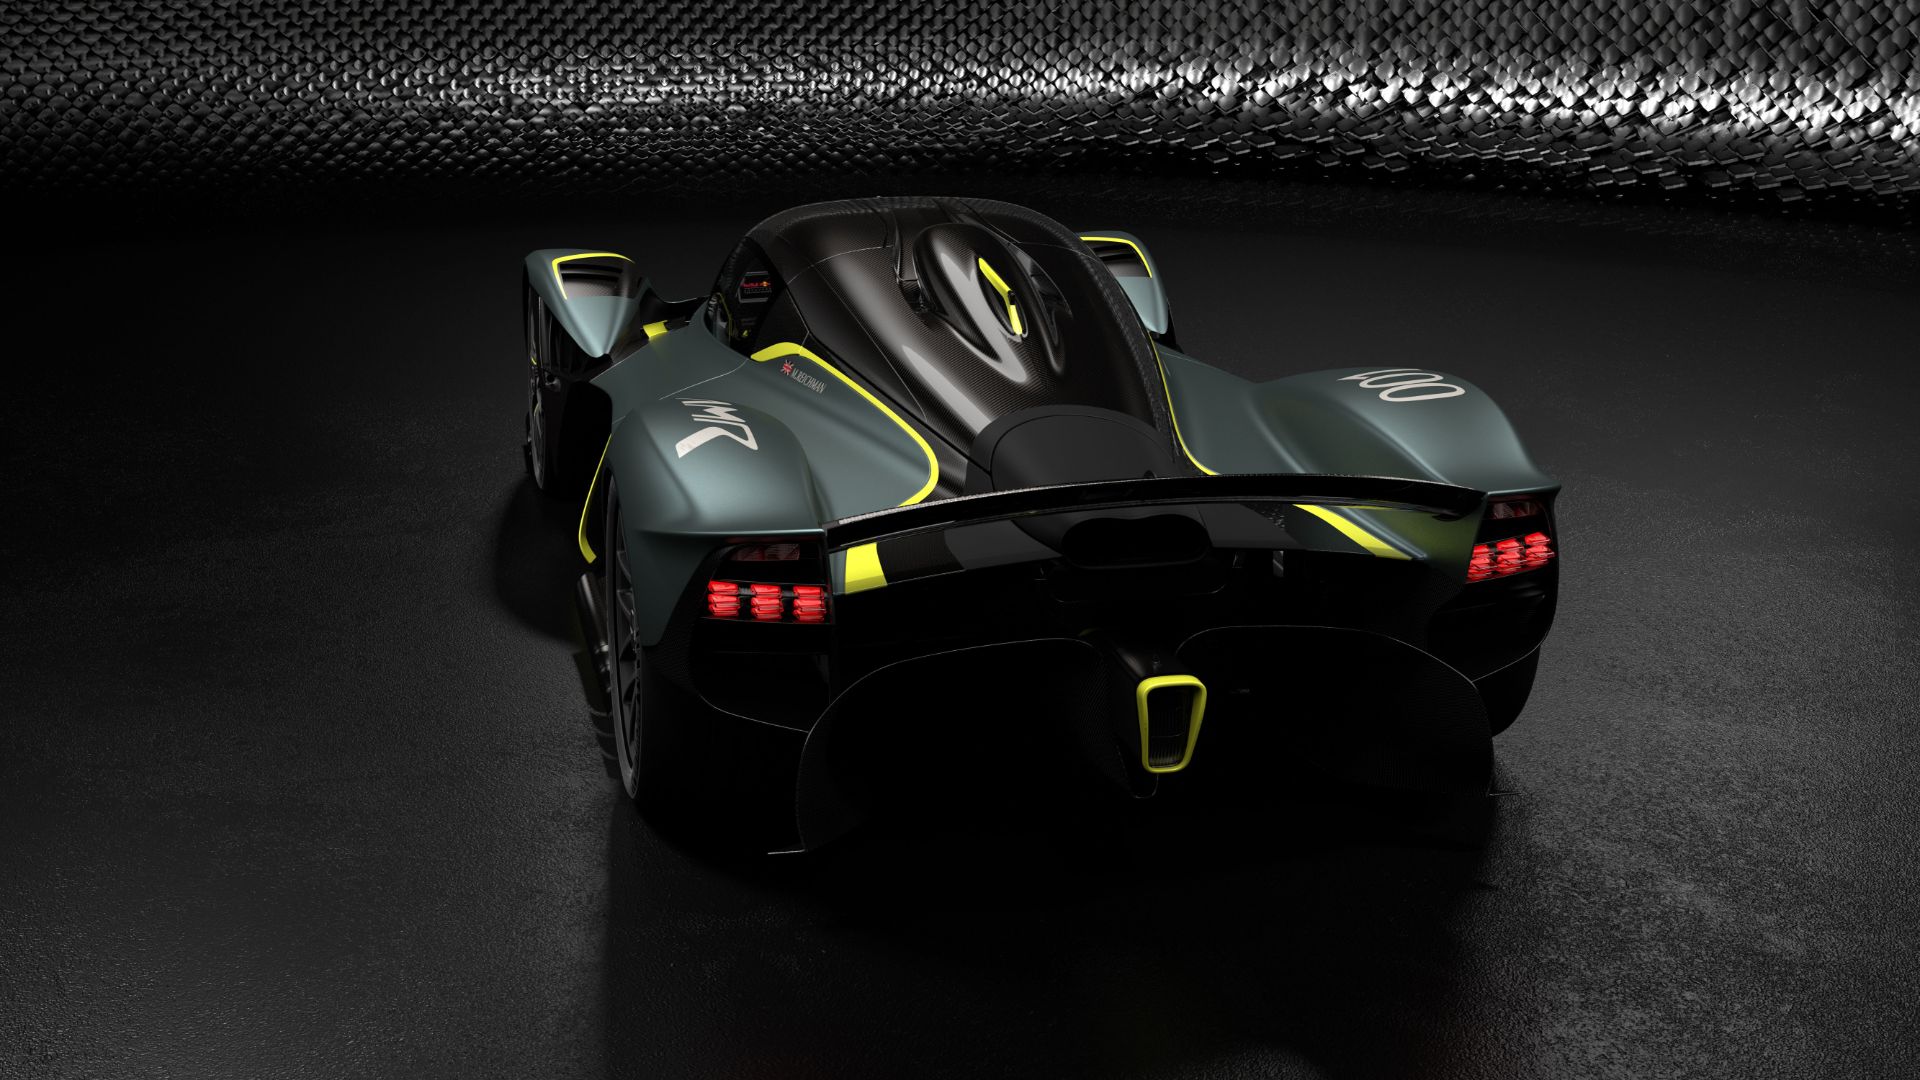 Aston Martin Valkyrie with AMR Track Performance Pack - Stirling Green and Lime livery 